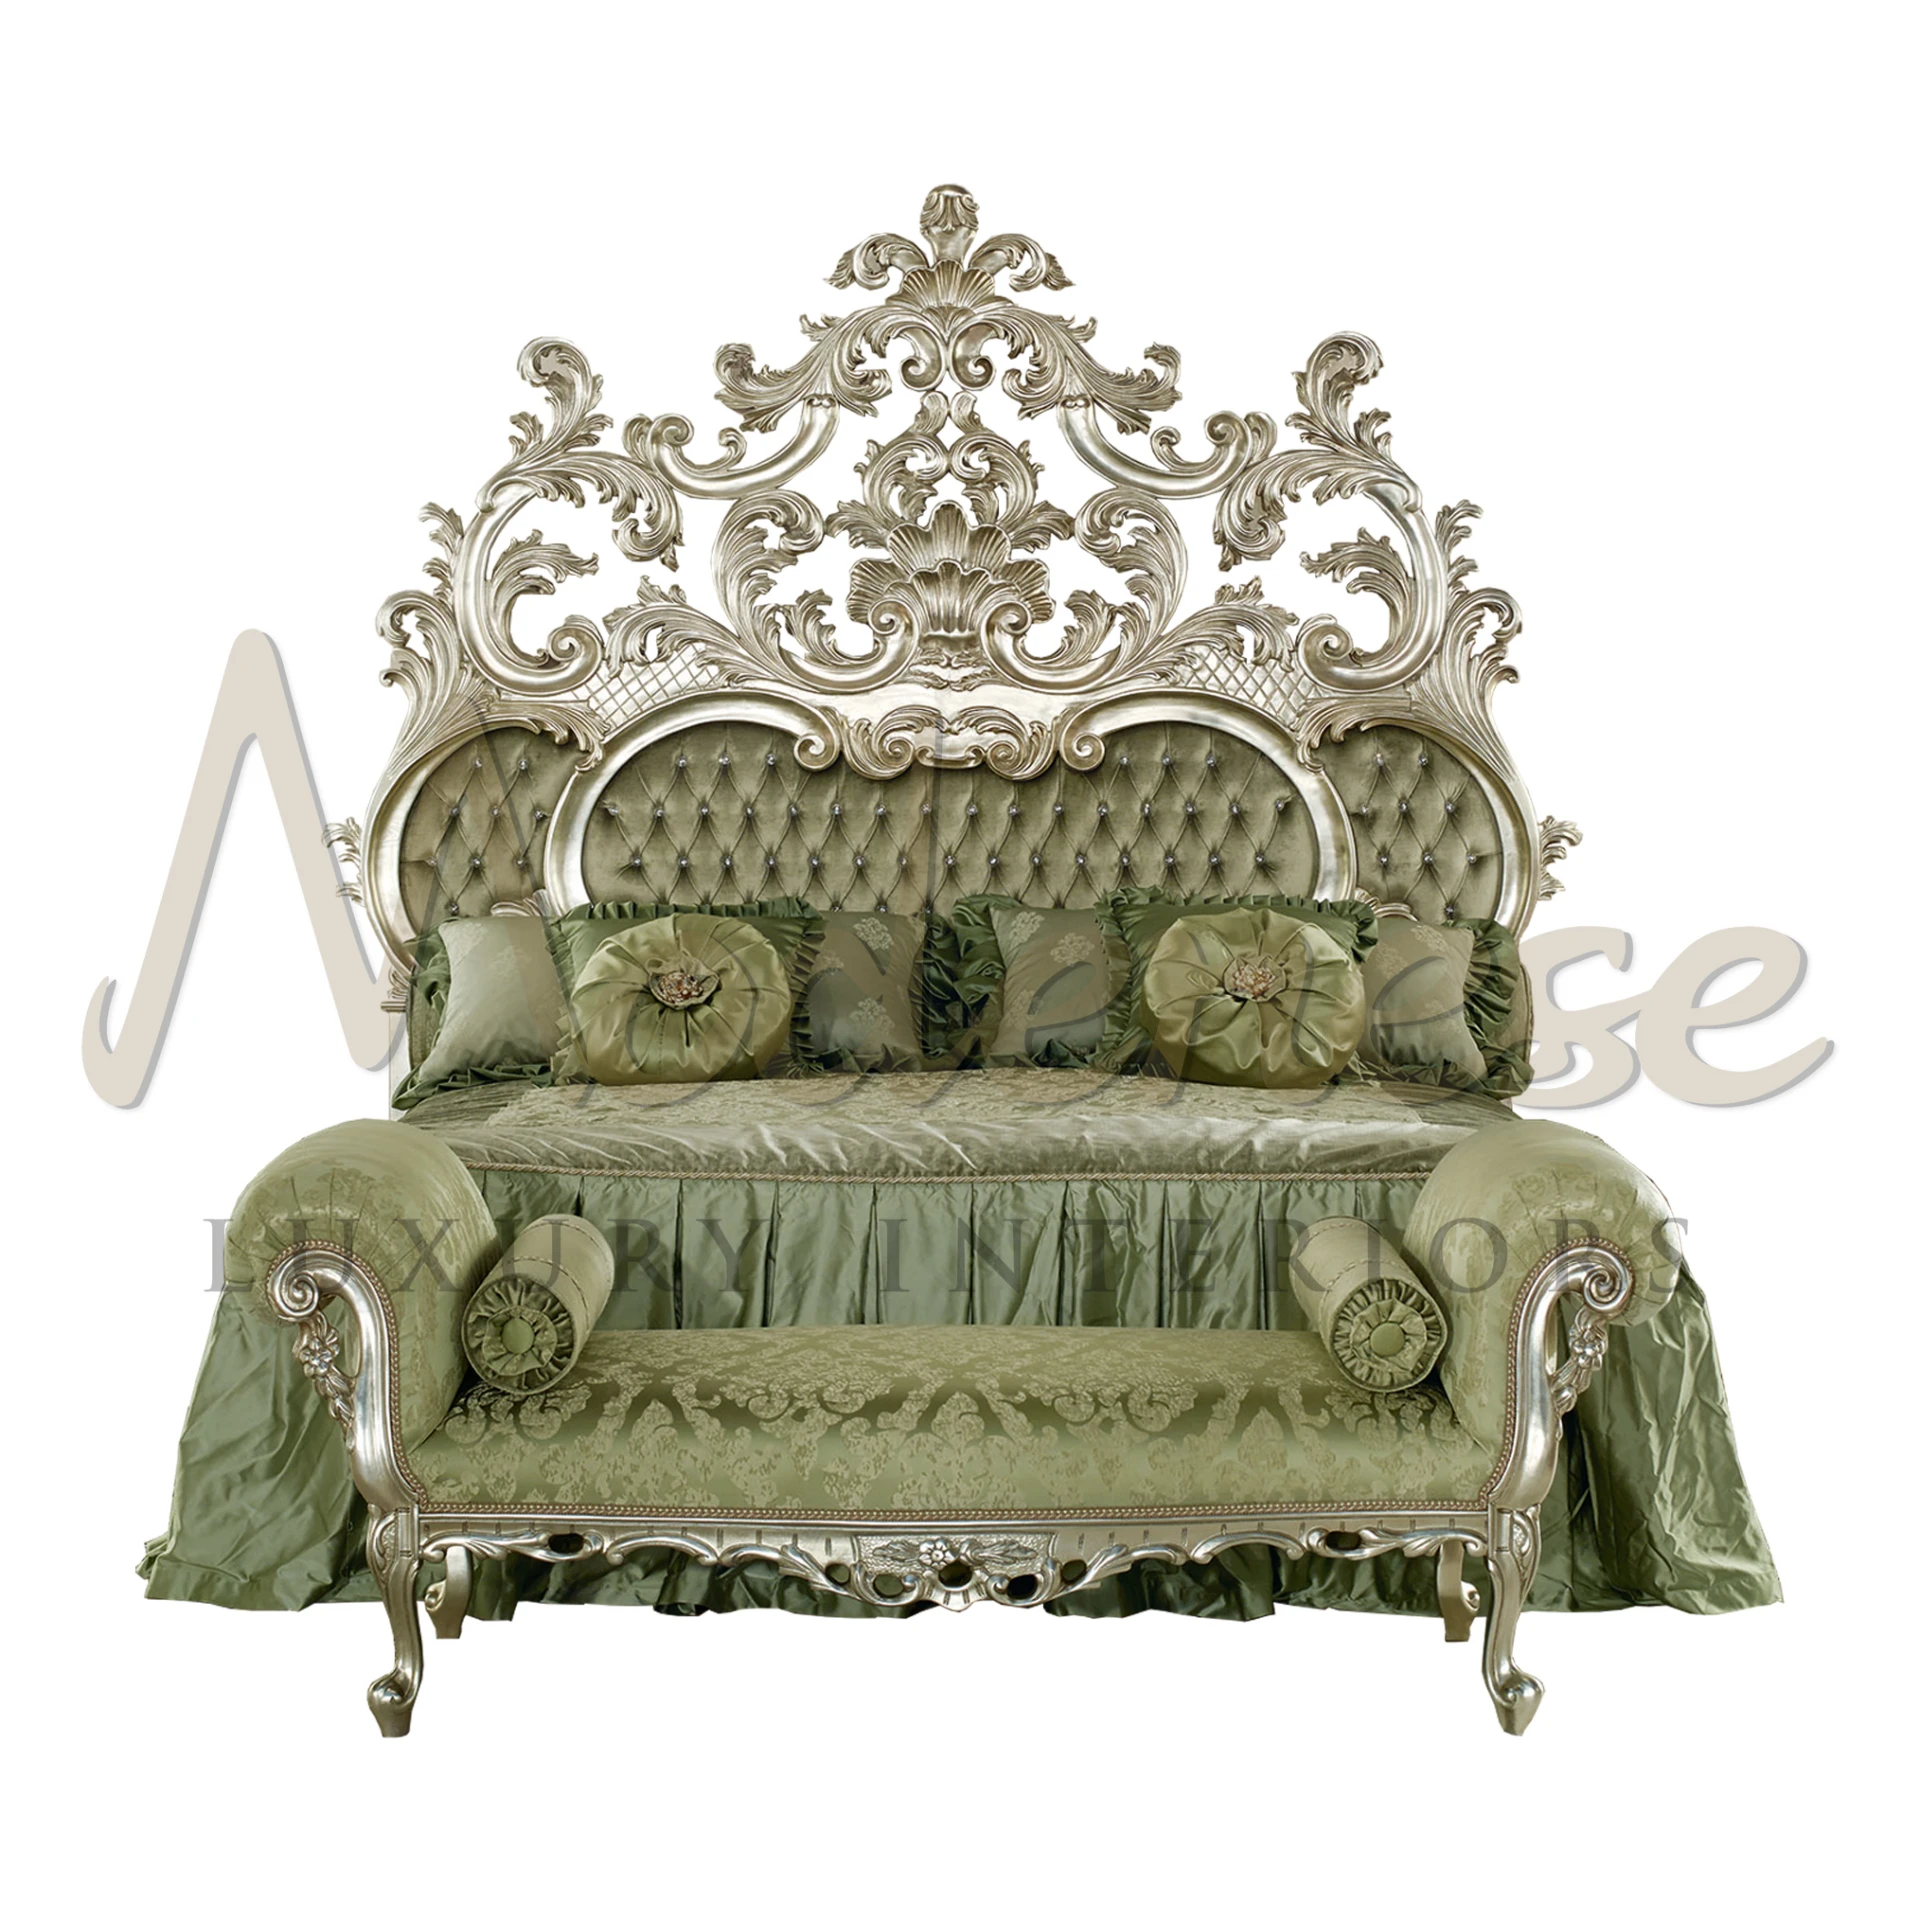 Luxury baroque-style sofa with a high, elaborately carved backrest and armrests. The sofa is upholstered in a luxurious tufted fabric in a shade of olive green, with matching green cushions. 